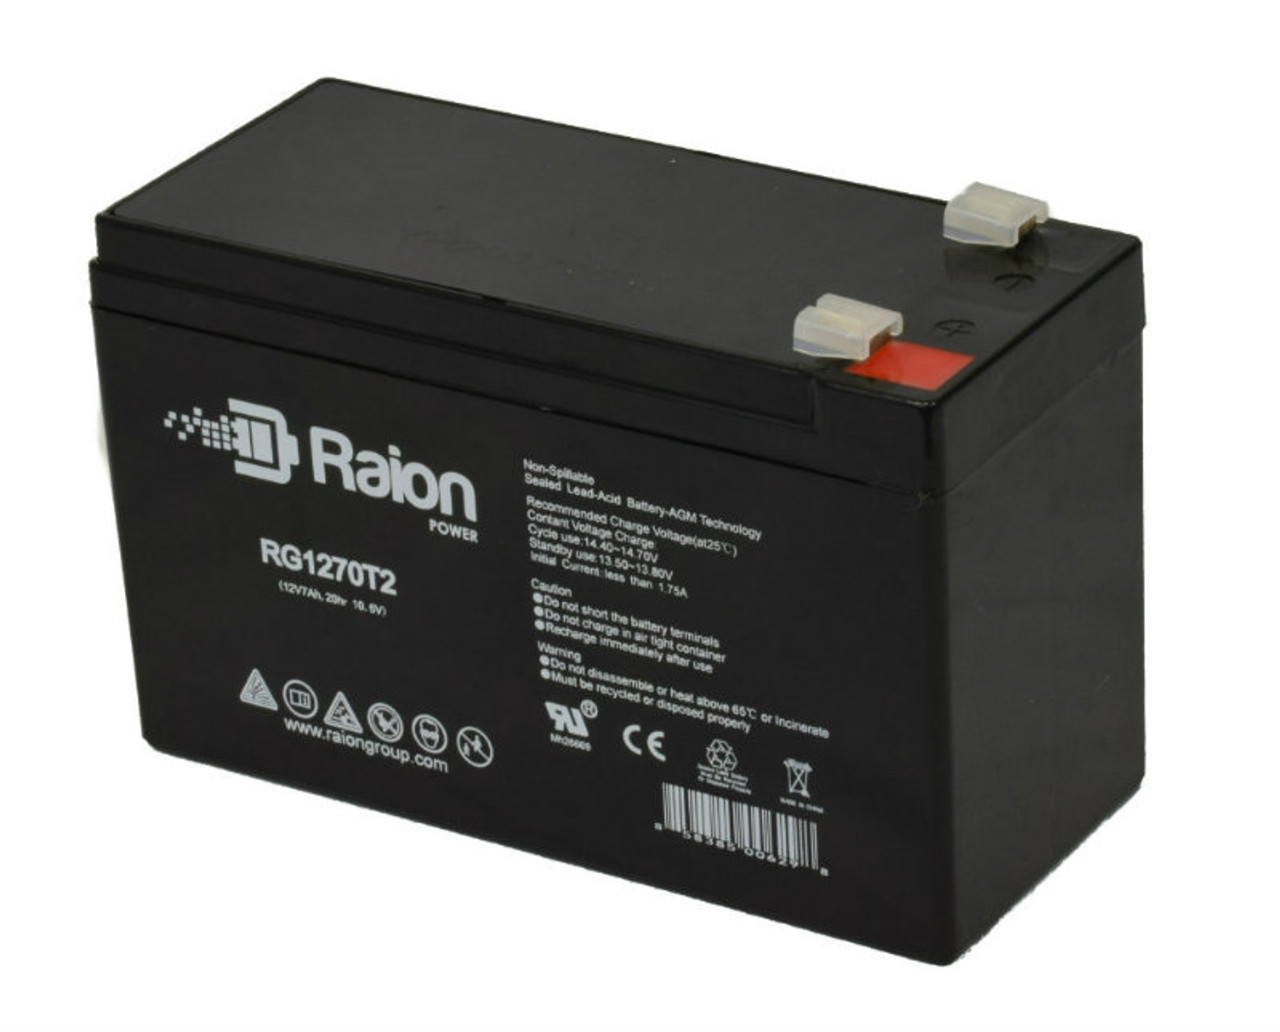 Raion Power Replacement 12V 7Ah RG1270T1 Fire Alarm Battery for Innovonics Alarm